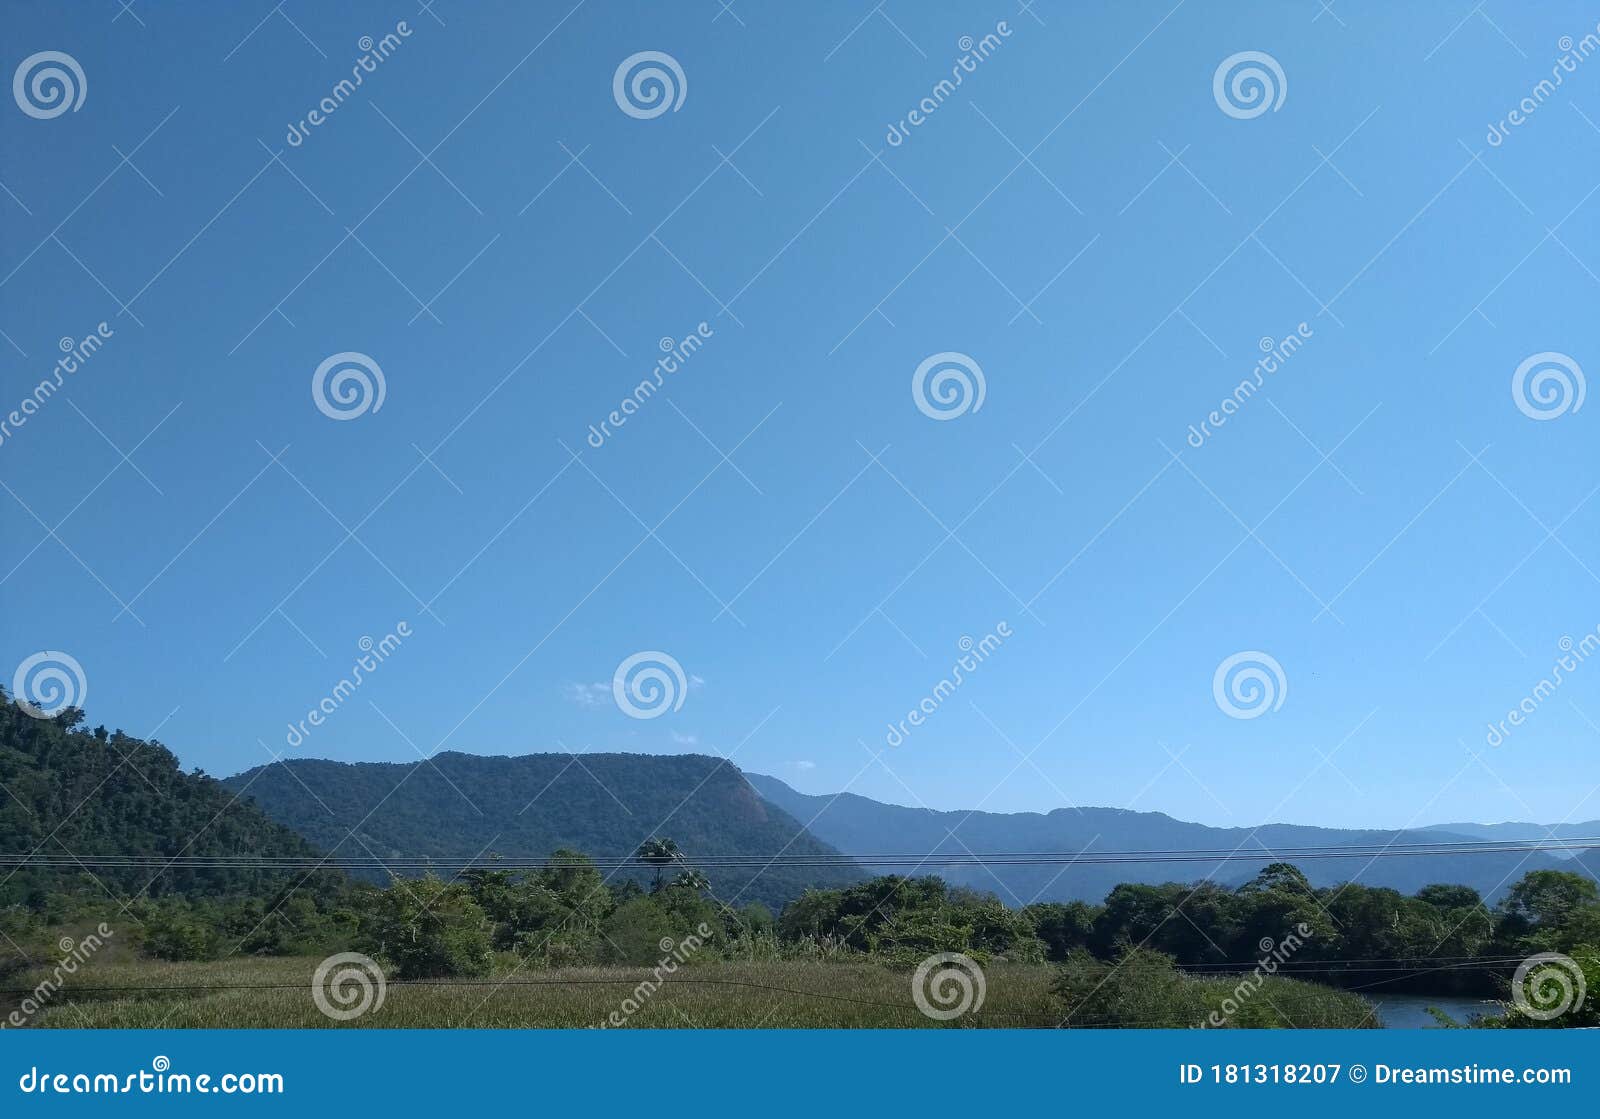 mountain, and blue sky background.